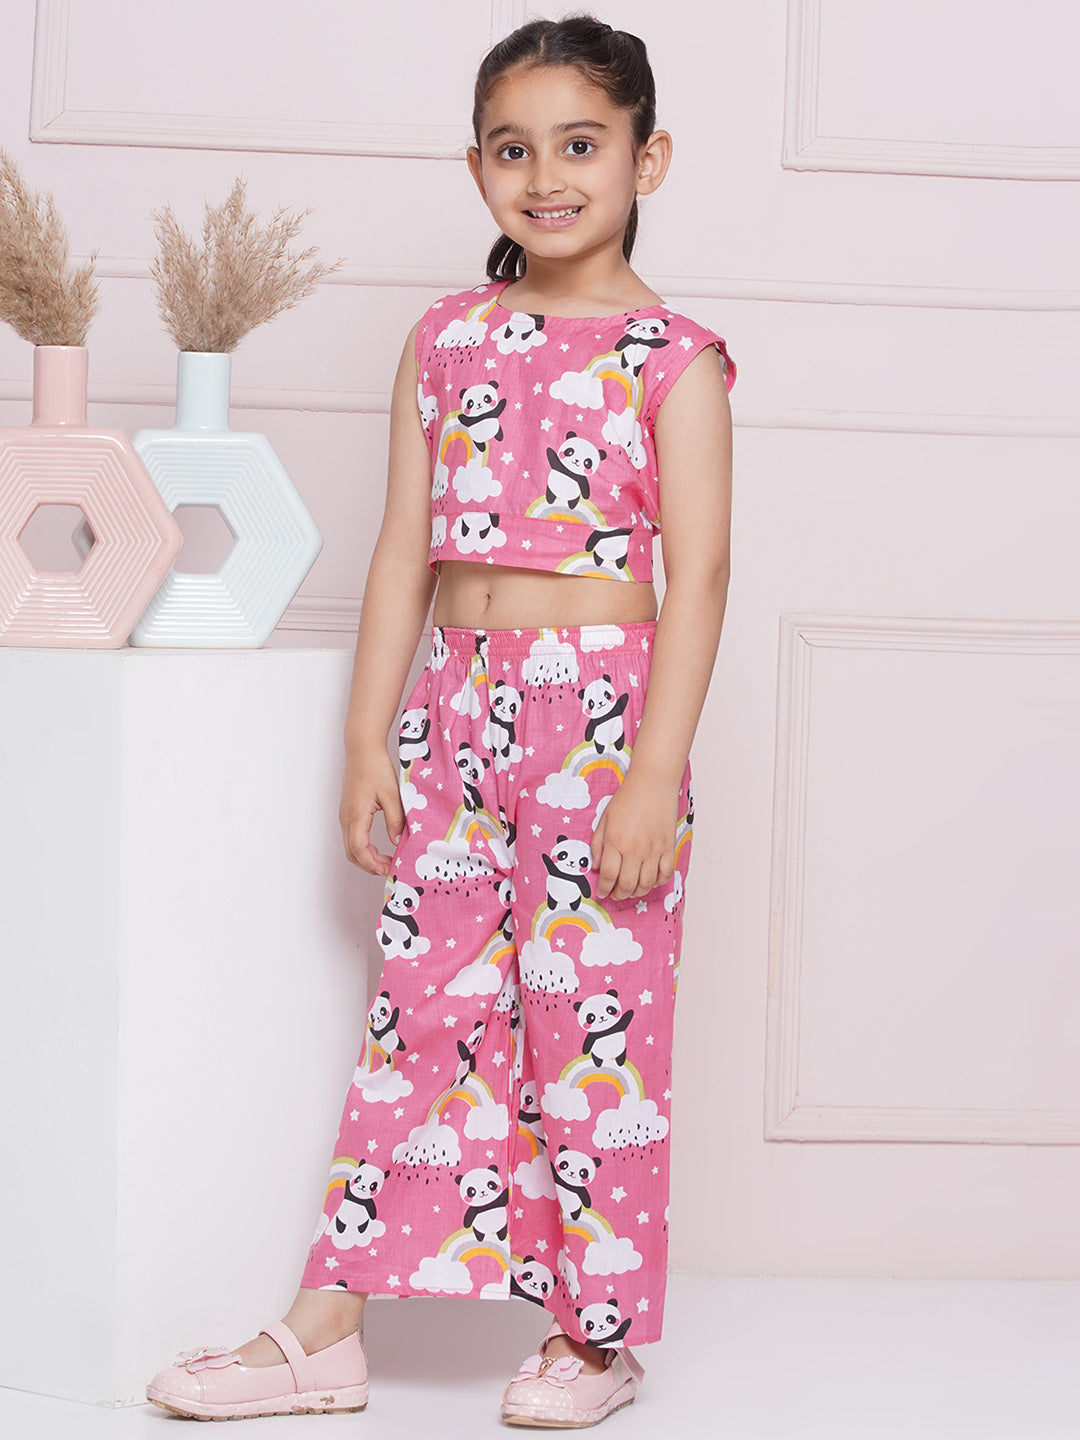 Pink Sleeveless Cotton CO-ORD Set with panda rainbow and cloud Print and Round Neck for Girls